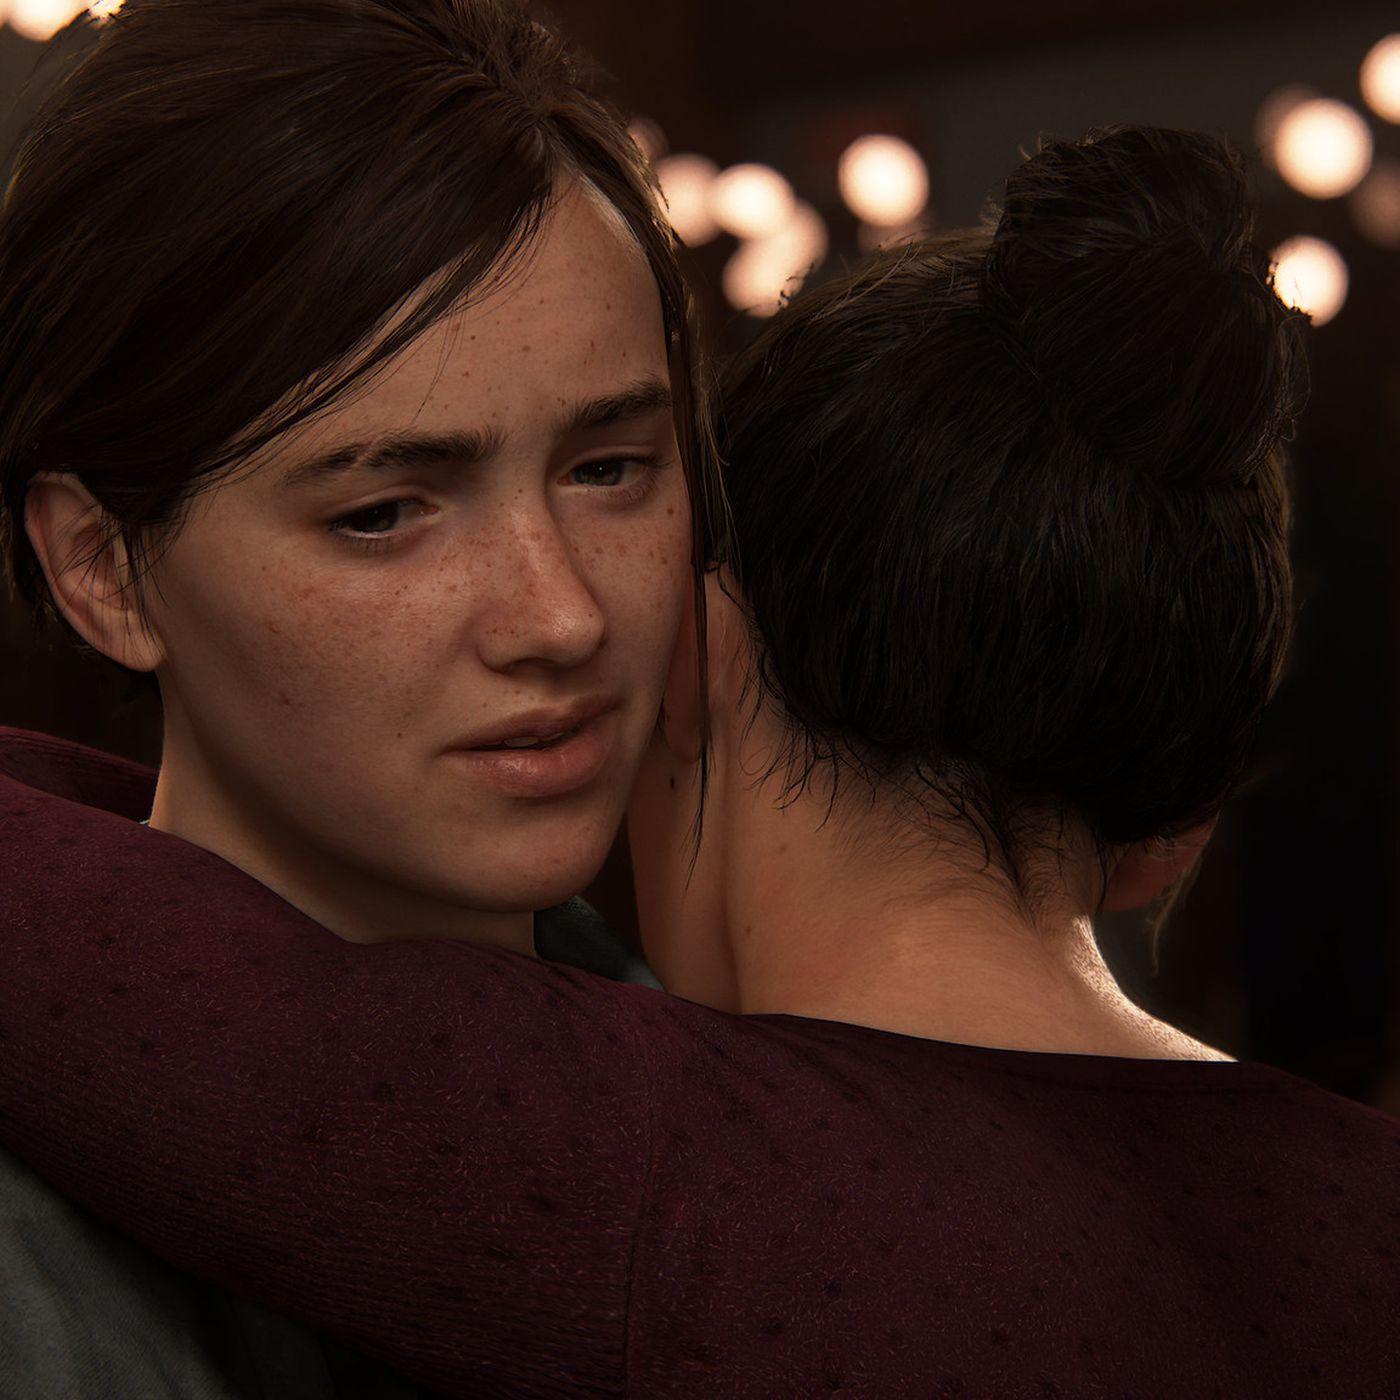 The Last of Us Part II is launching in February 2020